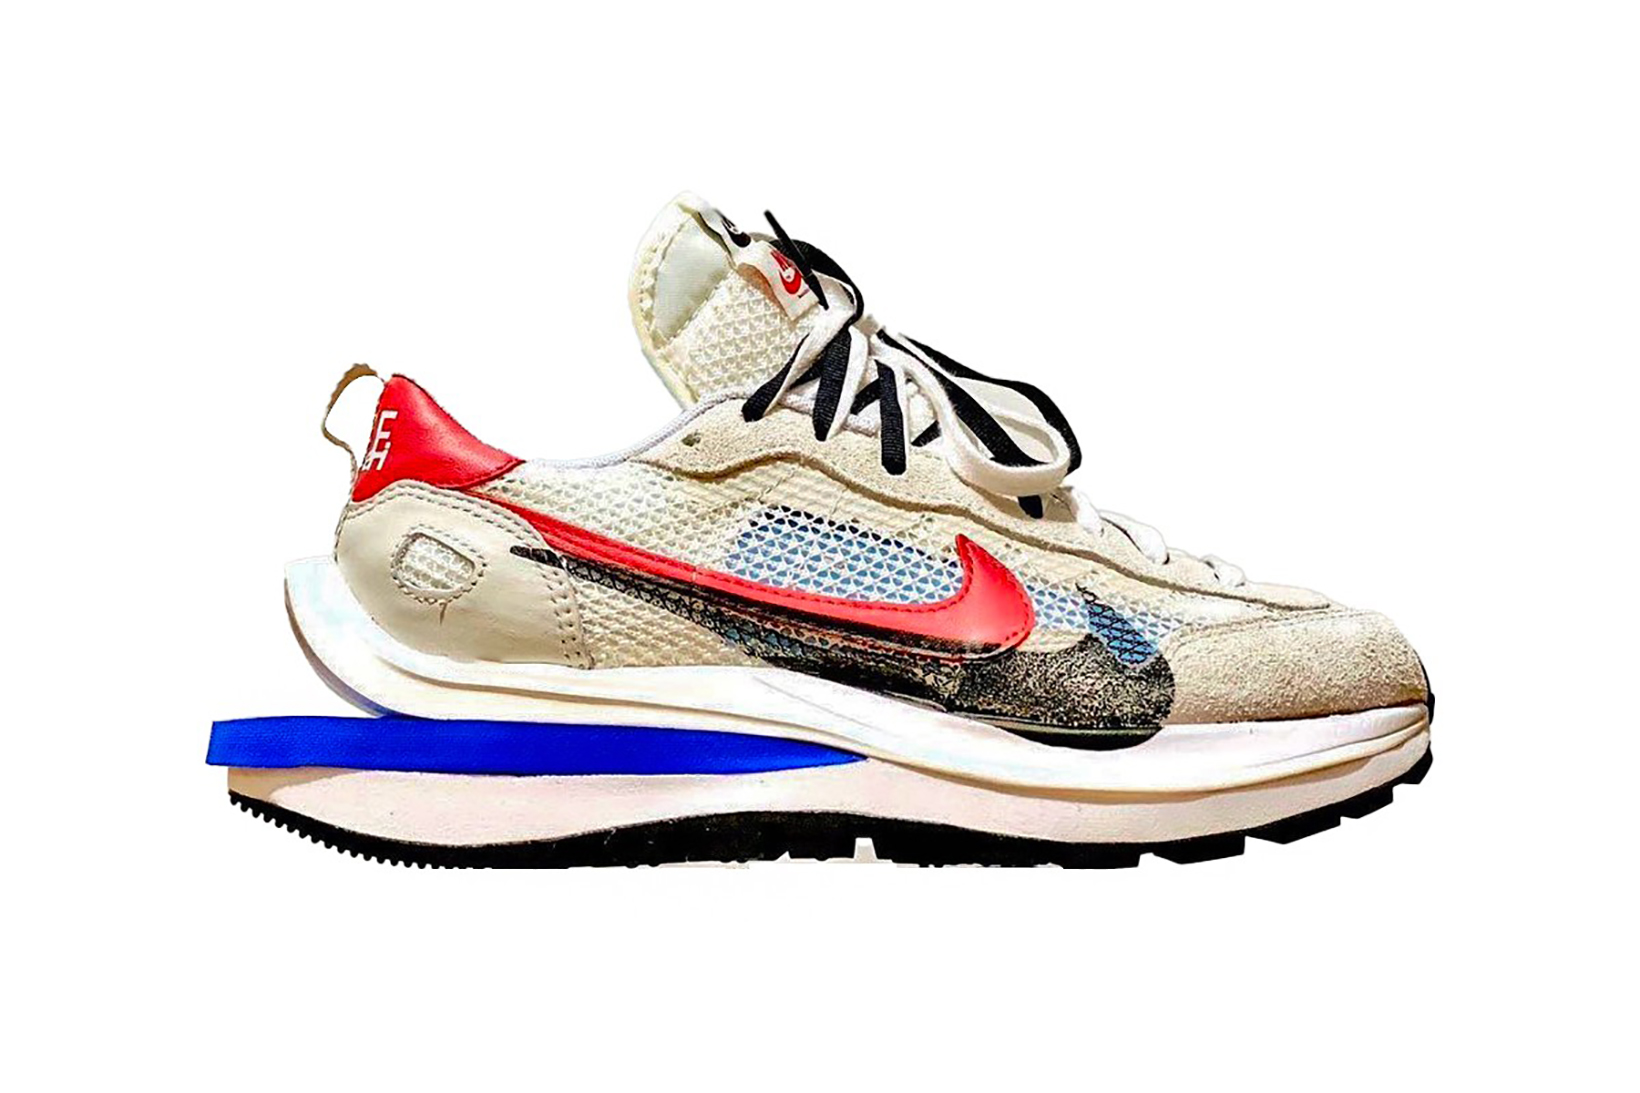 Add this Sacai X Nike collab to your 